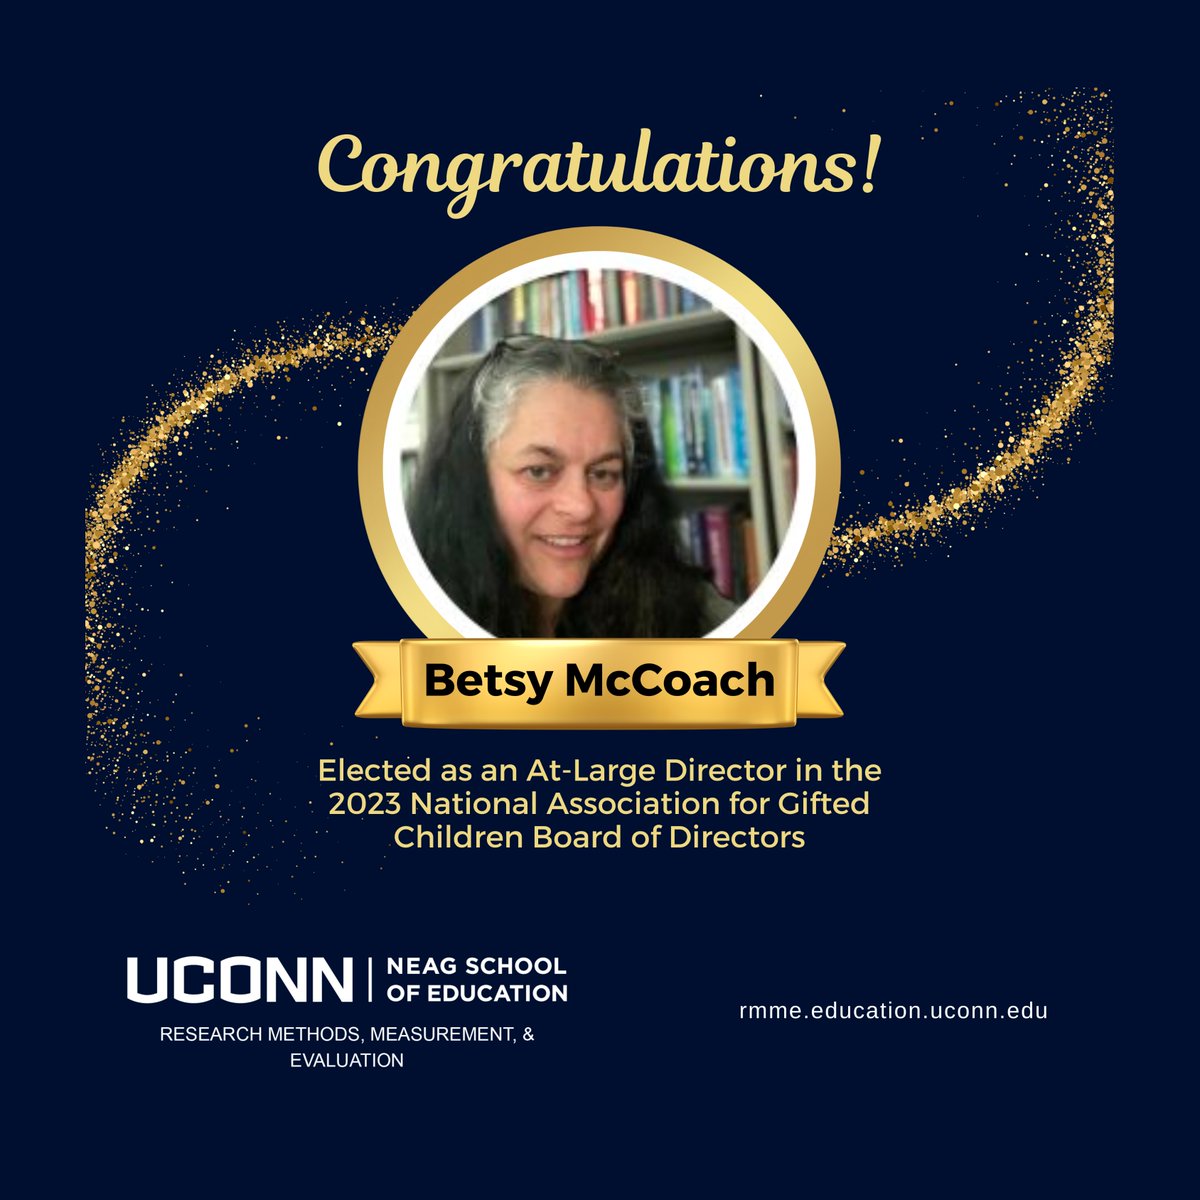 Congratulations to RMME #faculty member, Dr. D. Betsy McCoach, on her recent election! #NAGC23

rmme.education.uconn.edu
#UConn #Online #Research #Methods #Measurement #Evaluation

#BeANeagPhD #UConnWomen #HighlightHER #Gifted #GiftedEd #GiftedEducation